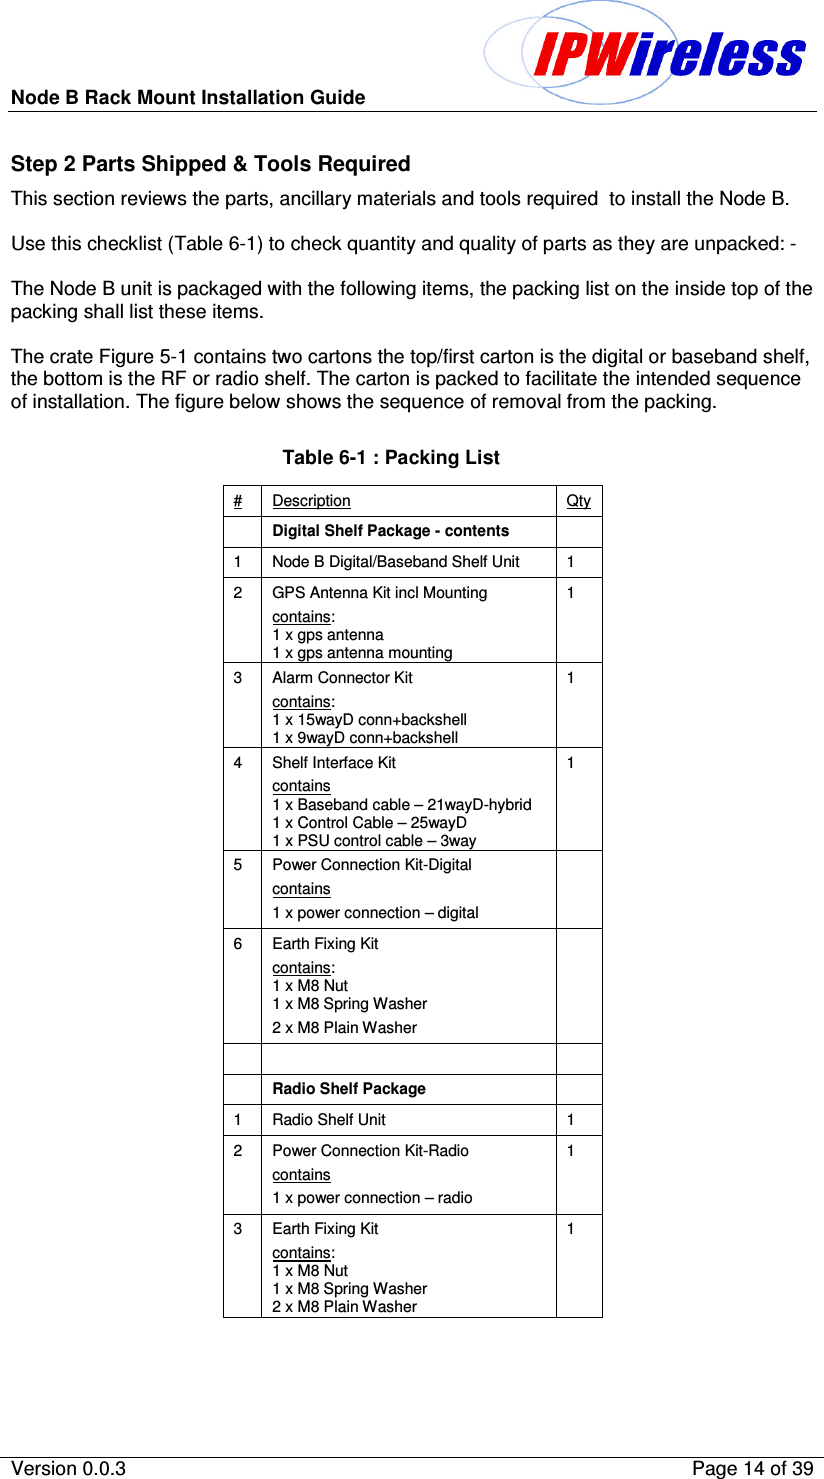 Node B Rack Mount Installation Guide                          Version 0.0.3    Page 14 of 39  Step 2 Parts Shipped &amp; Tools Required This section reviews the parts, ancillary materials and tools required  to install the Node B.  Use this checklist (Table 6-1) to check quantity and quality of parts as they are unpacked: -  The Node B unit is packaged with the following items, the packing list on the inside top of the packing shall list these items.  The crate Figure 5-1 contains two cartons the top/first carton is the digital or baseband shelf, the bottom is the RF or radio shelf. The carton is packed to facilitate the intended sequence of installation. The figure below shows the sequence of removal from the packing.  Table 6-1 : Packing List #  Description  Qty  Digital Shelf Package - contents   1  Node B Digital/Baseband Shelf Unit  1 2  GPS Antenna Kit incl Mounting contains:  1 x gps antenna  1 x gps antenna mounting 1 3  Alarm Connector Kit contains: 1 x 15wayD conn+backshell 1 x 9wayD conn+backshell 1 4  Shelf Interface Kit contains 1 x Baseband cable – 21wayD-hybrid 1 x Control Cable – 25wayD 1 x PSU control cable – 3way 1 5  Power Connection Kit-Digital contains 1 x power connection – digital  6  Earth Fixing Kit contains:  1 x M8 Nut 1 x M8 Spring Washer 2 x M8 Plain Washer      Radio Shelf Package   1  Radio Shelf Unit  1 2  Power Connection Kit-Radio contains 1 x power connection – radio 1 3  Earth Fixing Kit contains:  1 x M8 Nut 1 x M8 Spring Washer 2 x M8 Plain Washer 1      